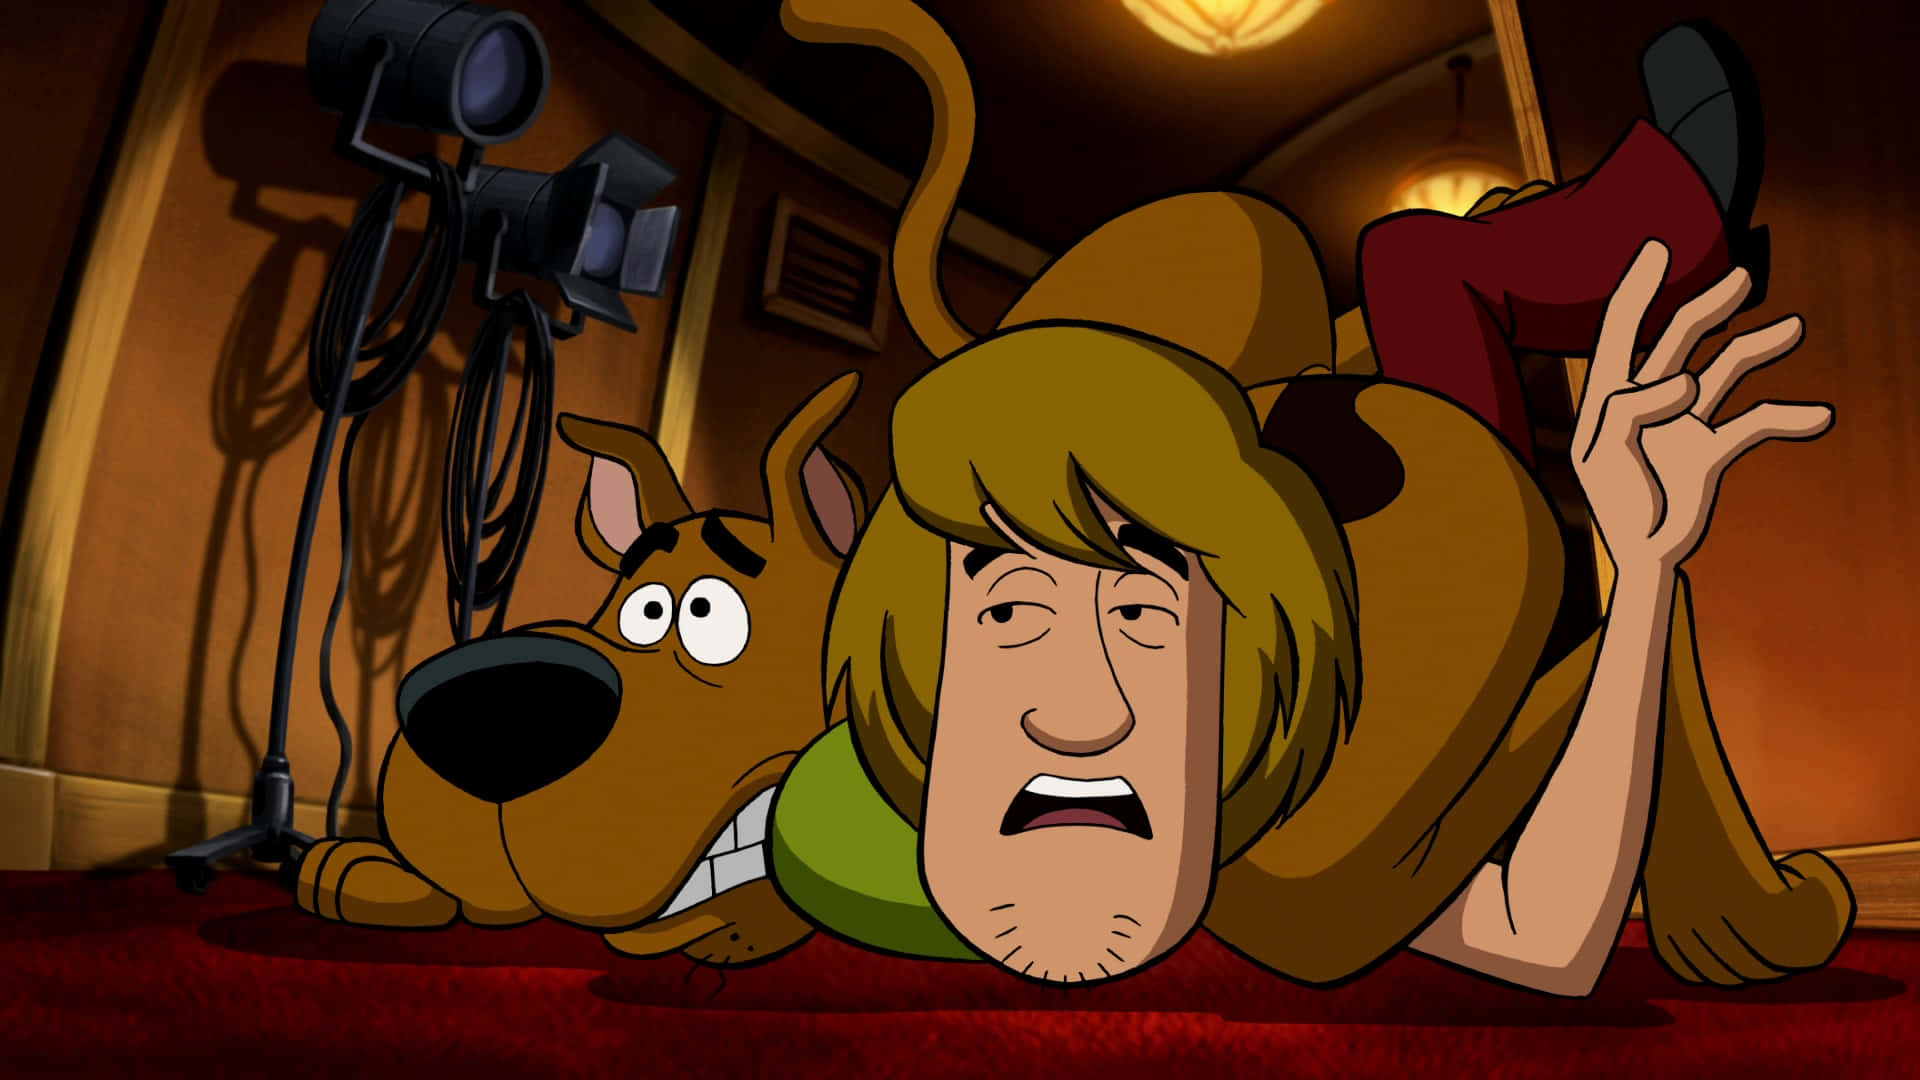 Scooby Doo And A Dog Laying On The Floor